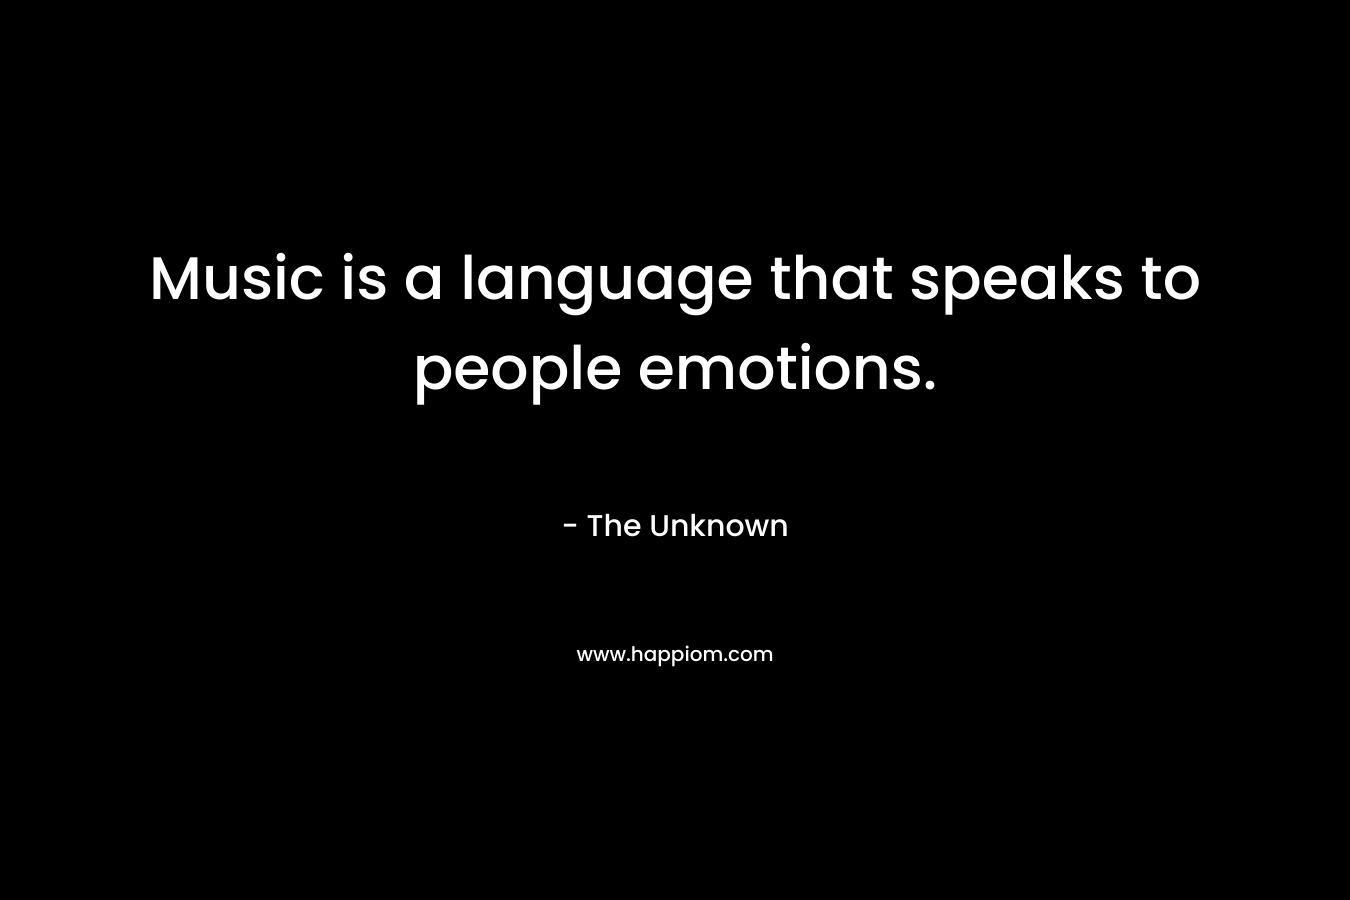 Music is a language that speaks to people emotions.